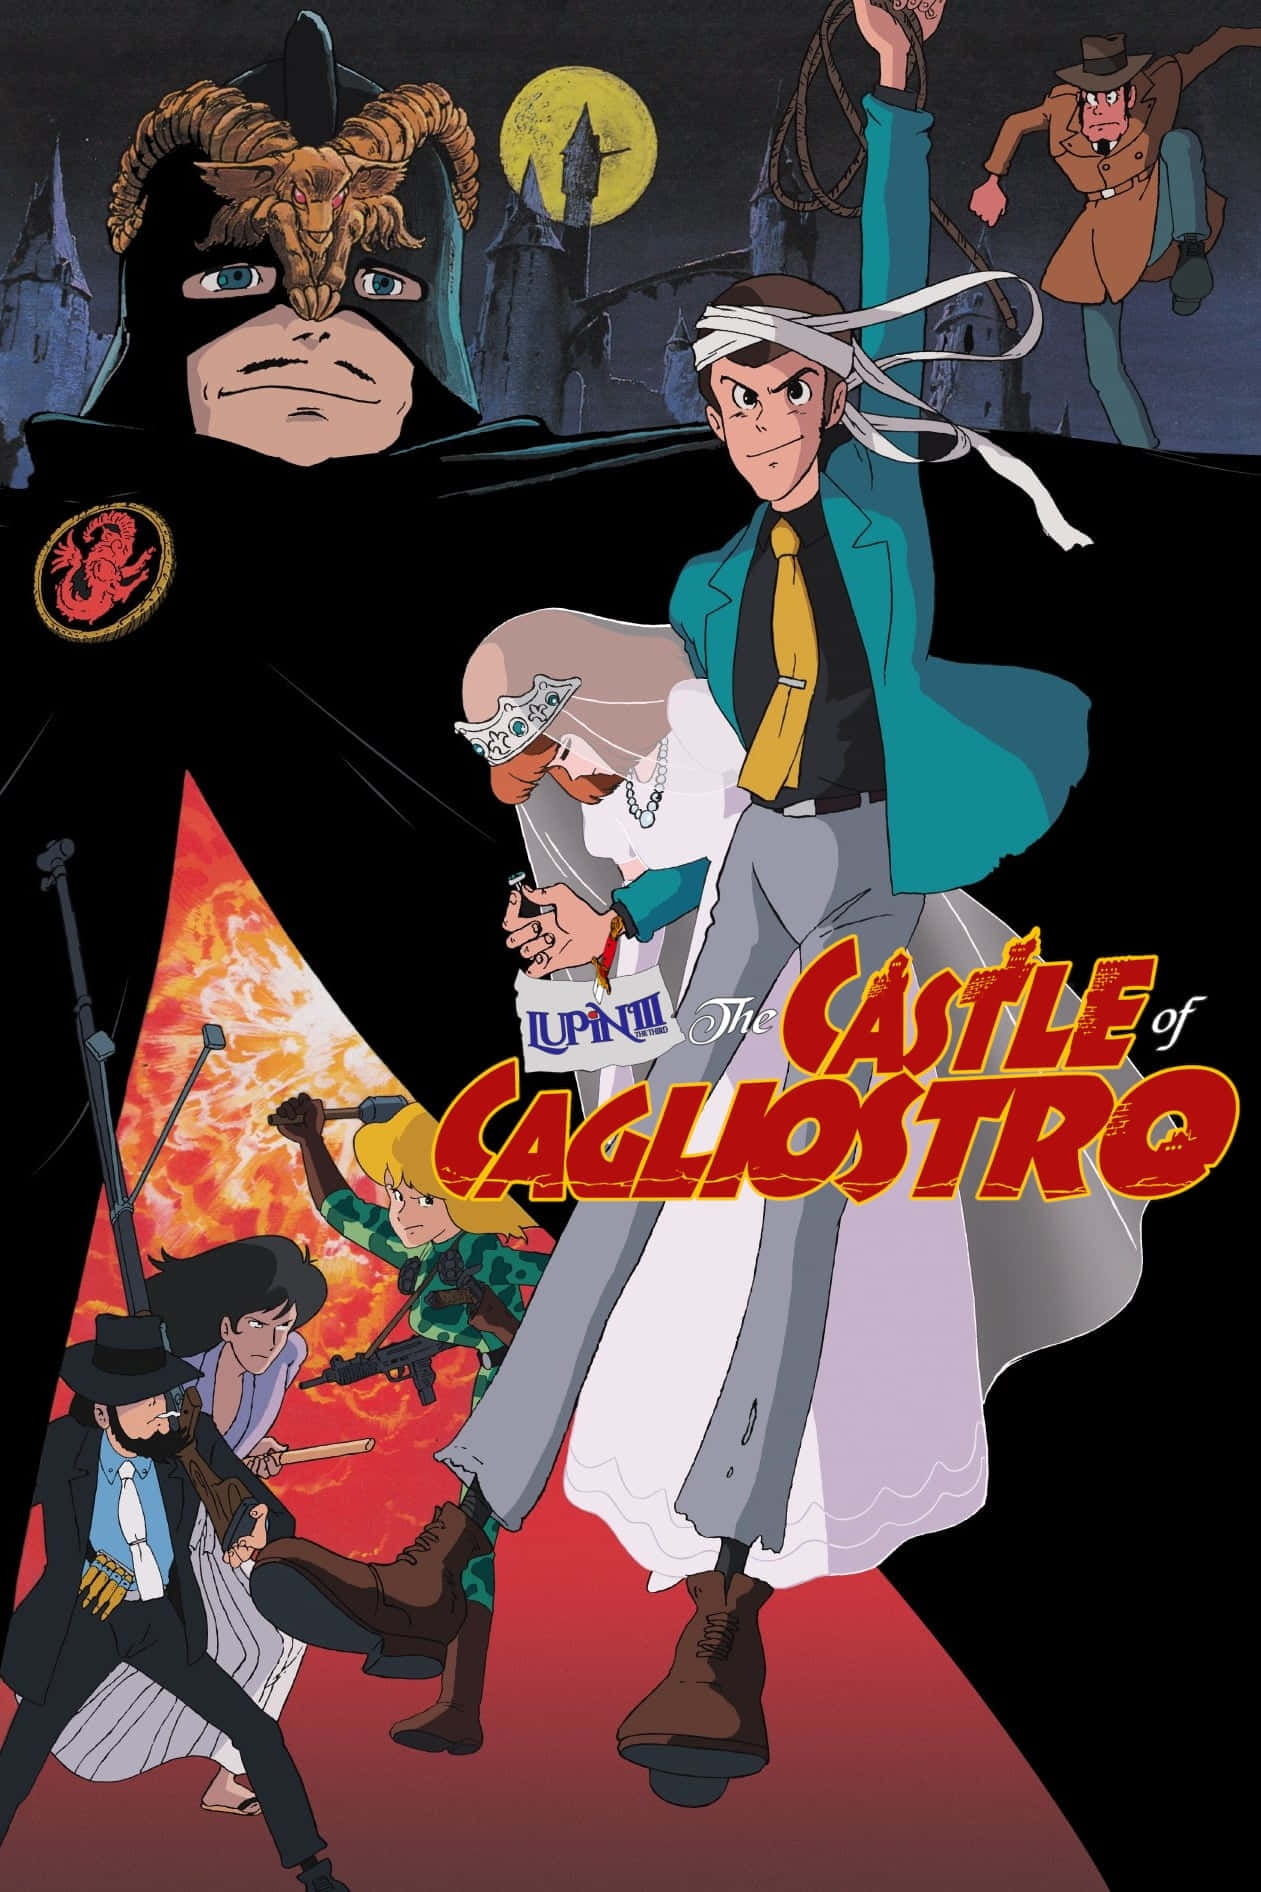 Lupin III and his gang in front of Castle of Cagliostro Wallpaper